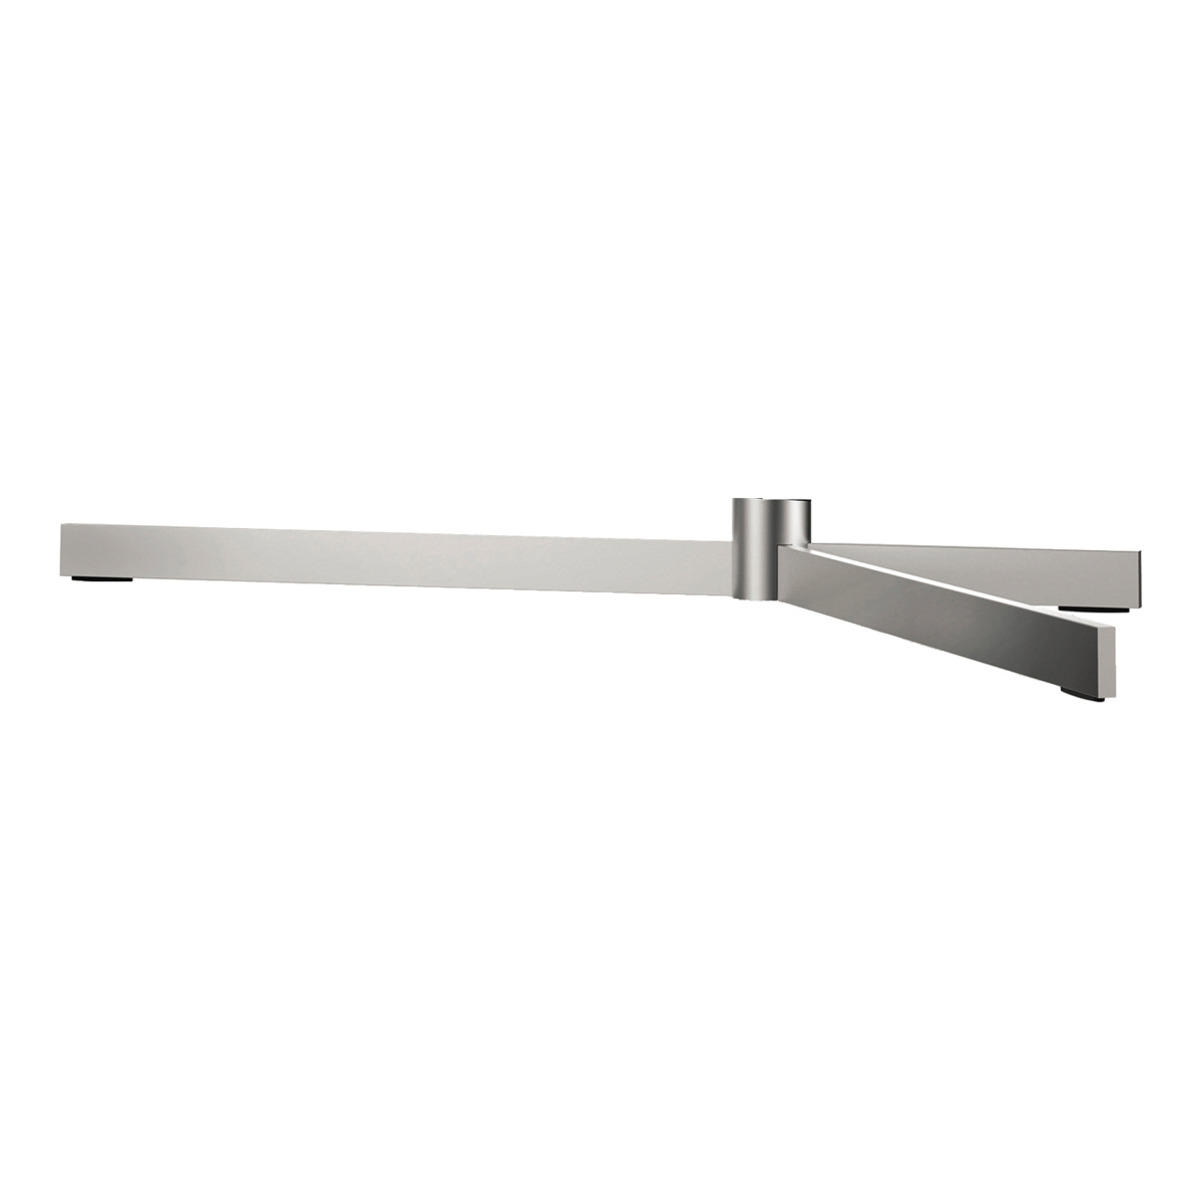 Image of Loewe Table Stand Reference 55 UHD alu-zilver